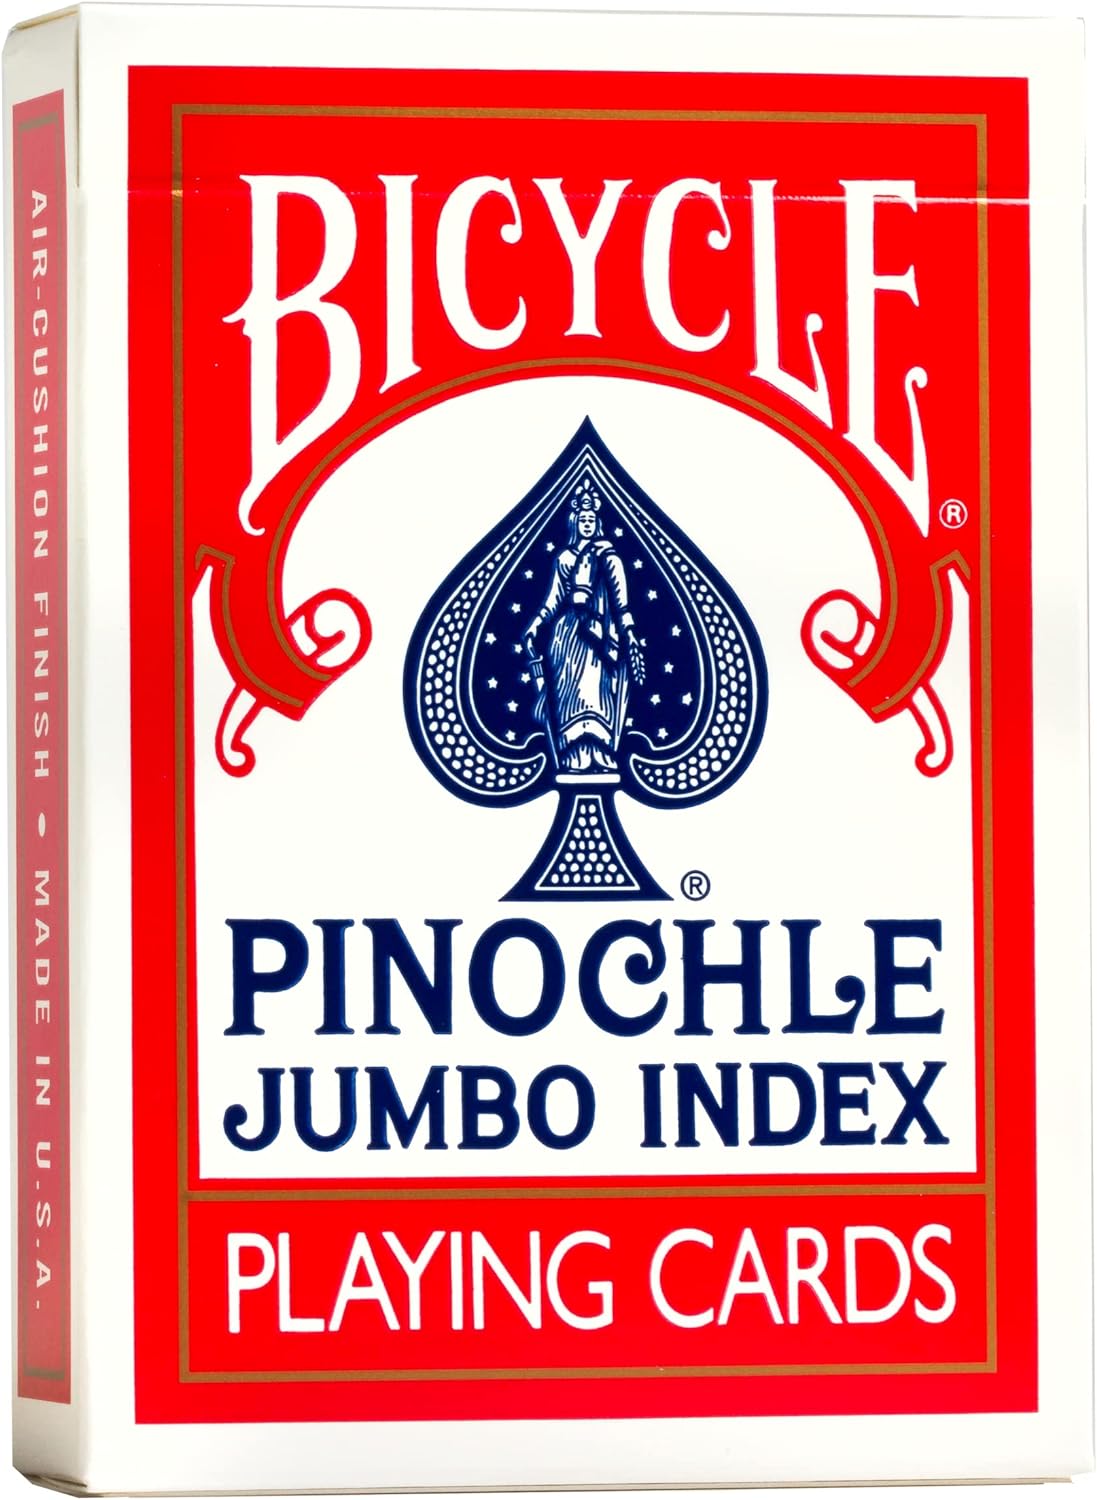 Bicycle Pinochle Jumbo Index Playing Cards - Bards & Cards